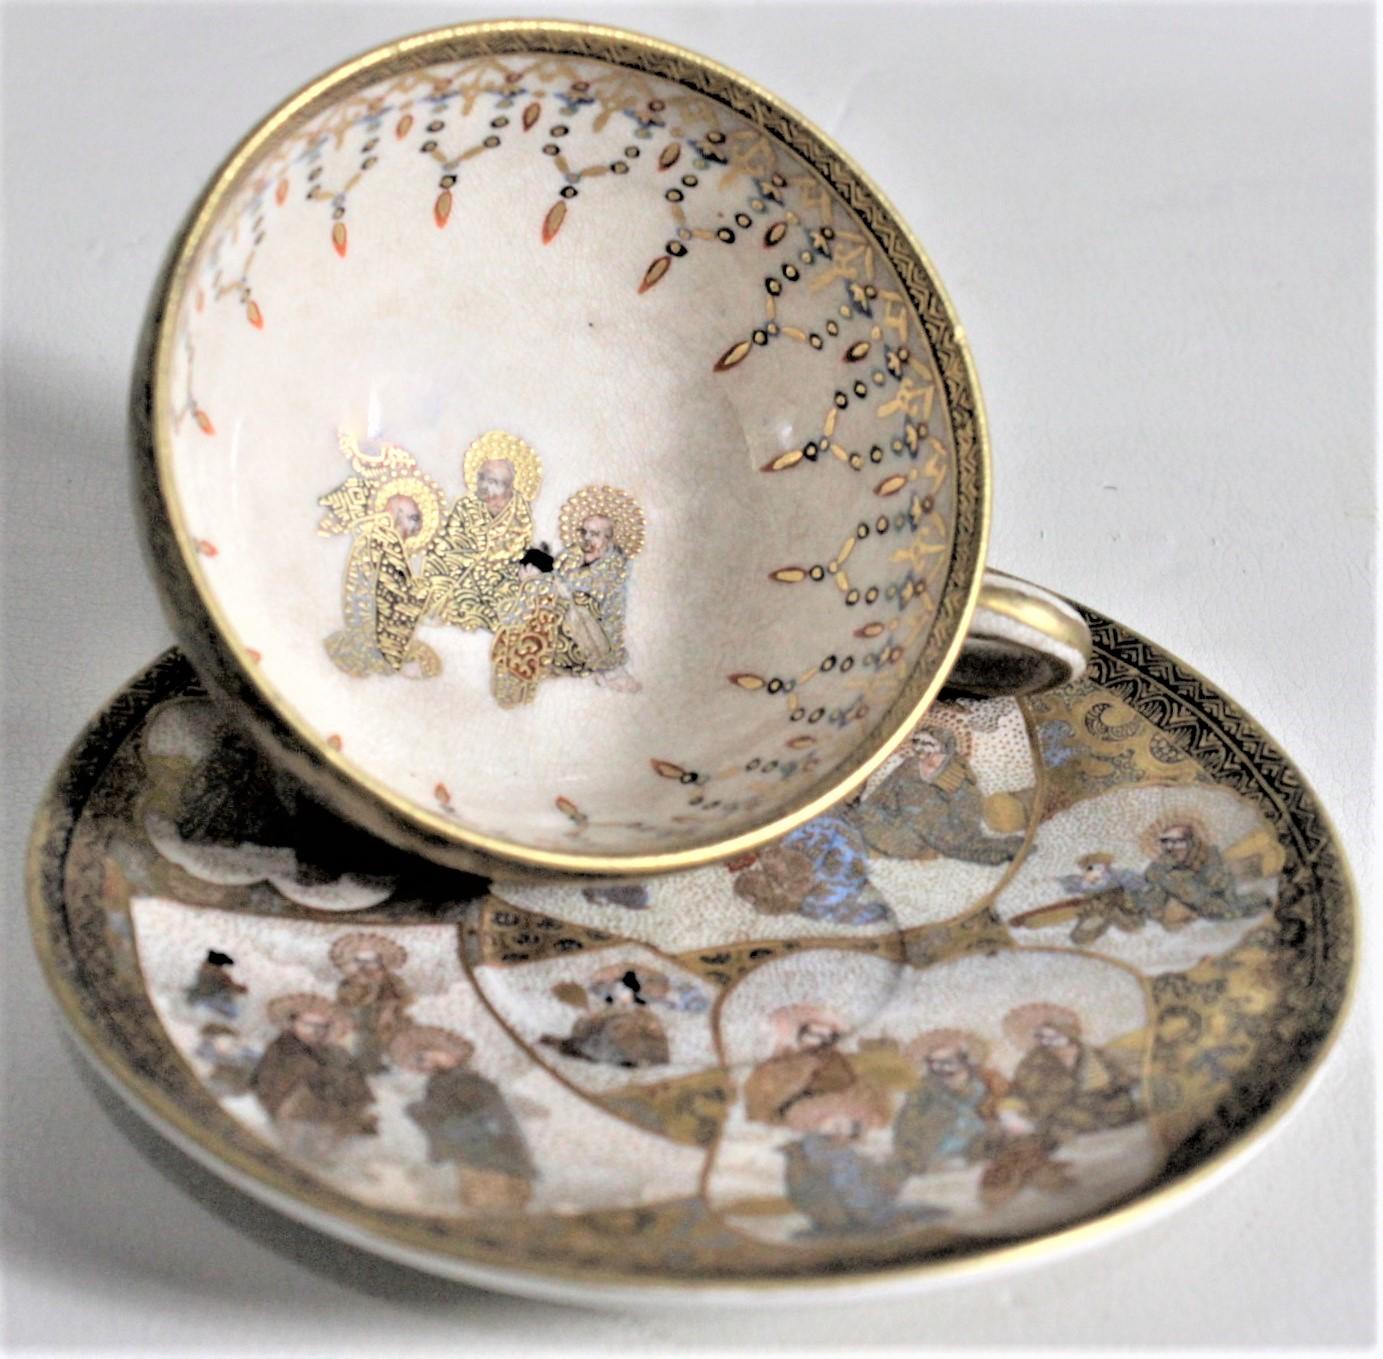 Antique Japanese Satsuma Teacup & Saucer Set with Ornate Hand Painted Decoration For Sale 4